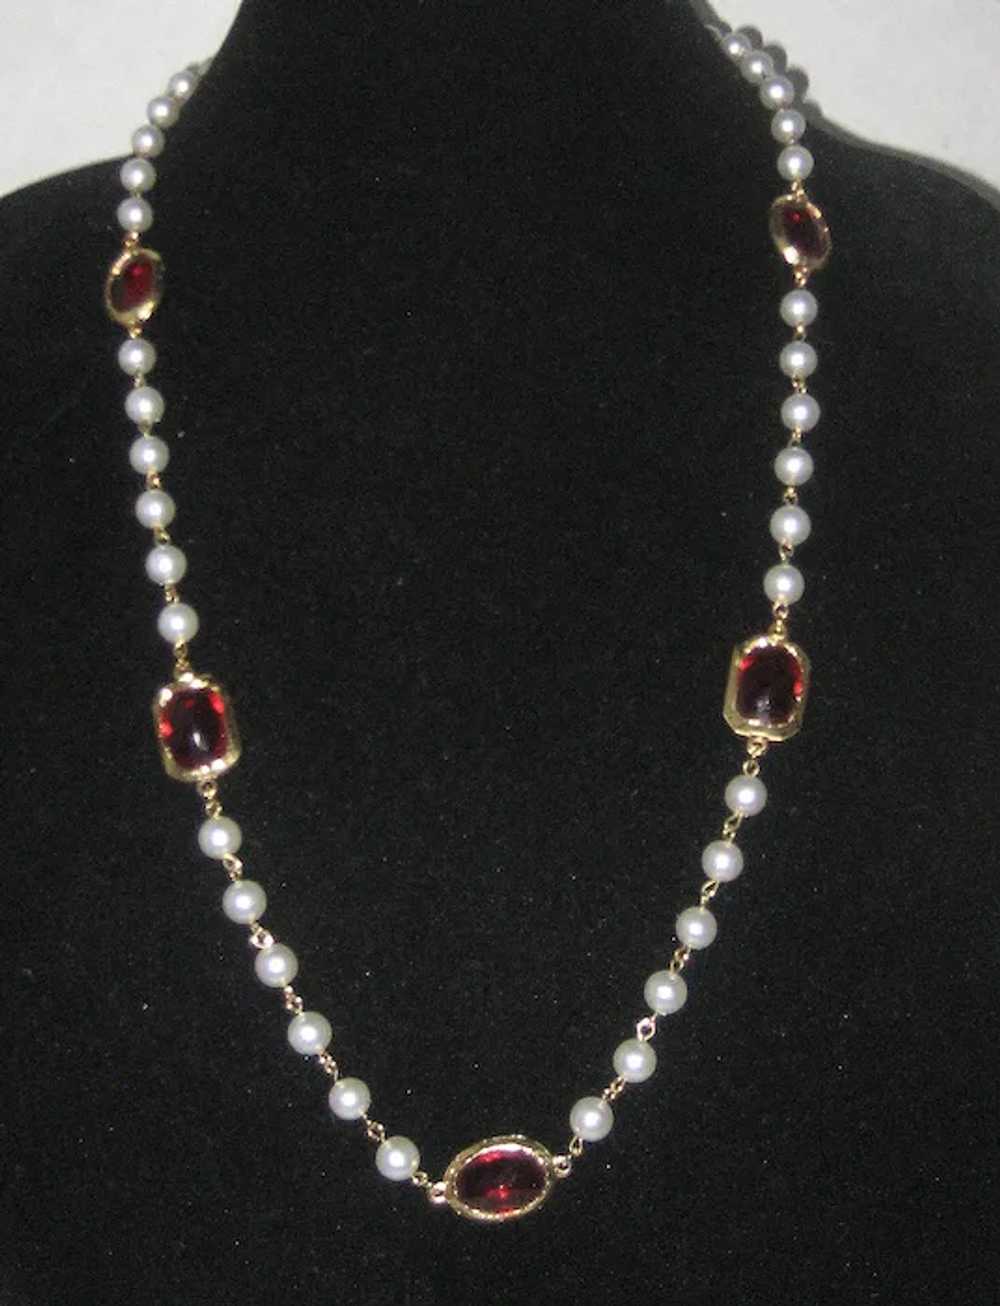 Imitation Pearl Necklace with Red Glass Gems - image 8